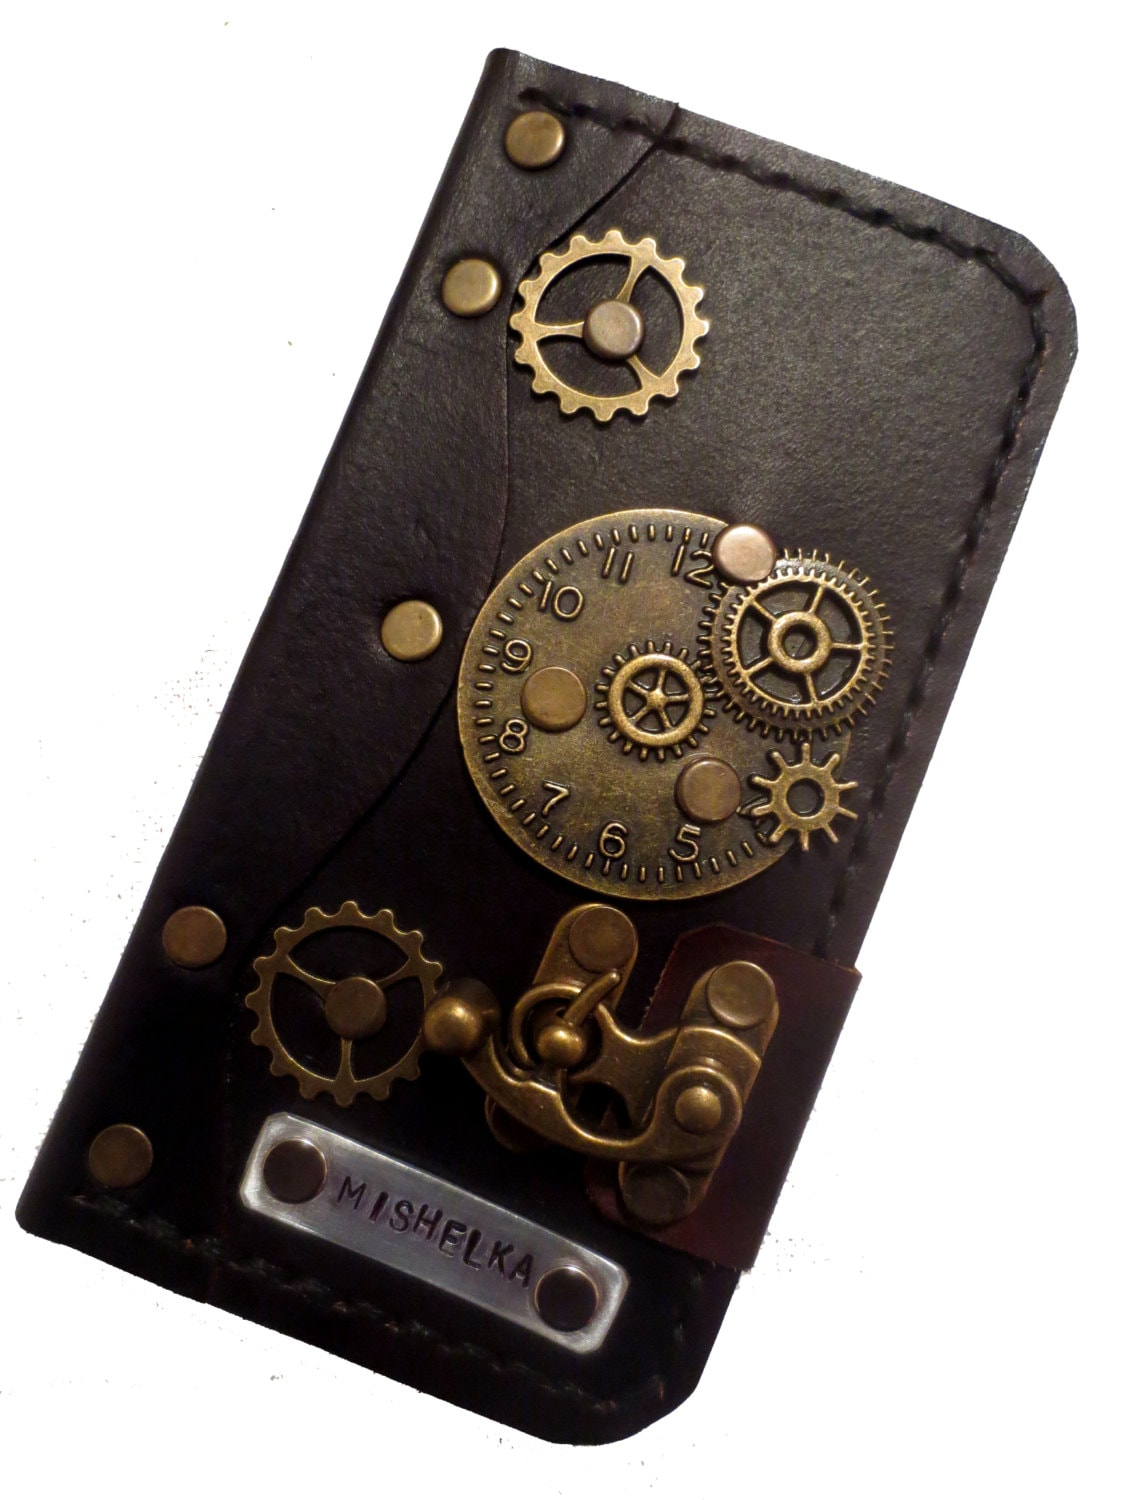 Personalised hand stitched stamped victorian steampunk clock gears pendant dark brown leather iPhone 6 mobile case cover holder book style